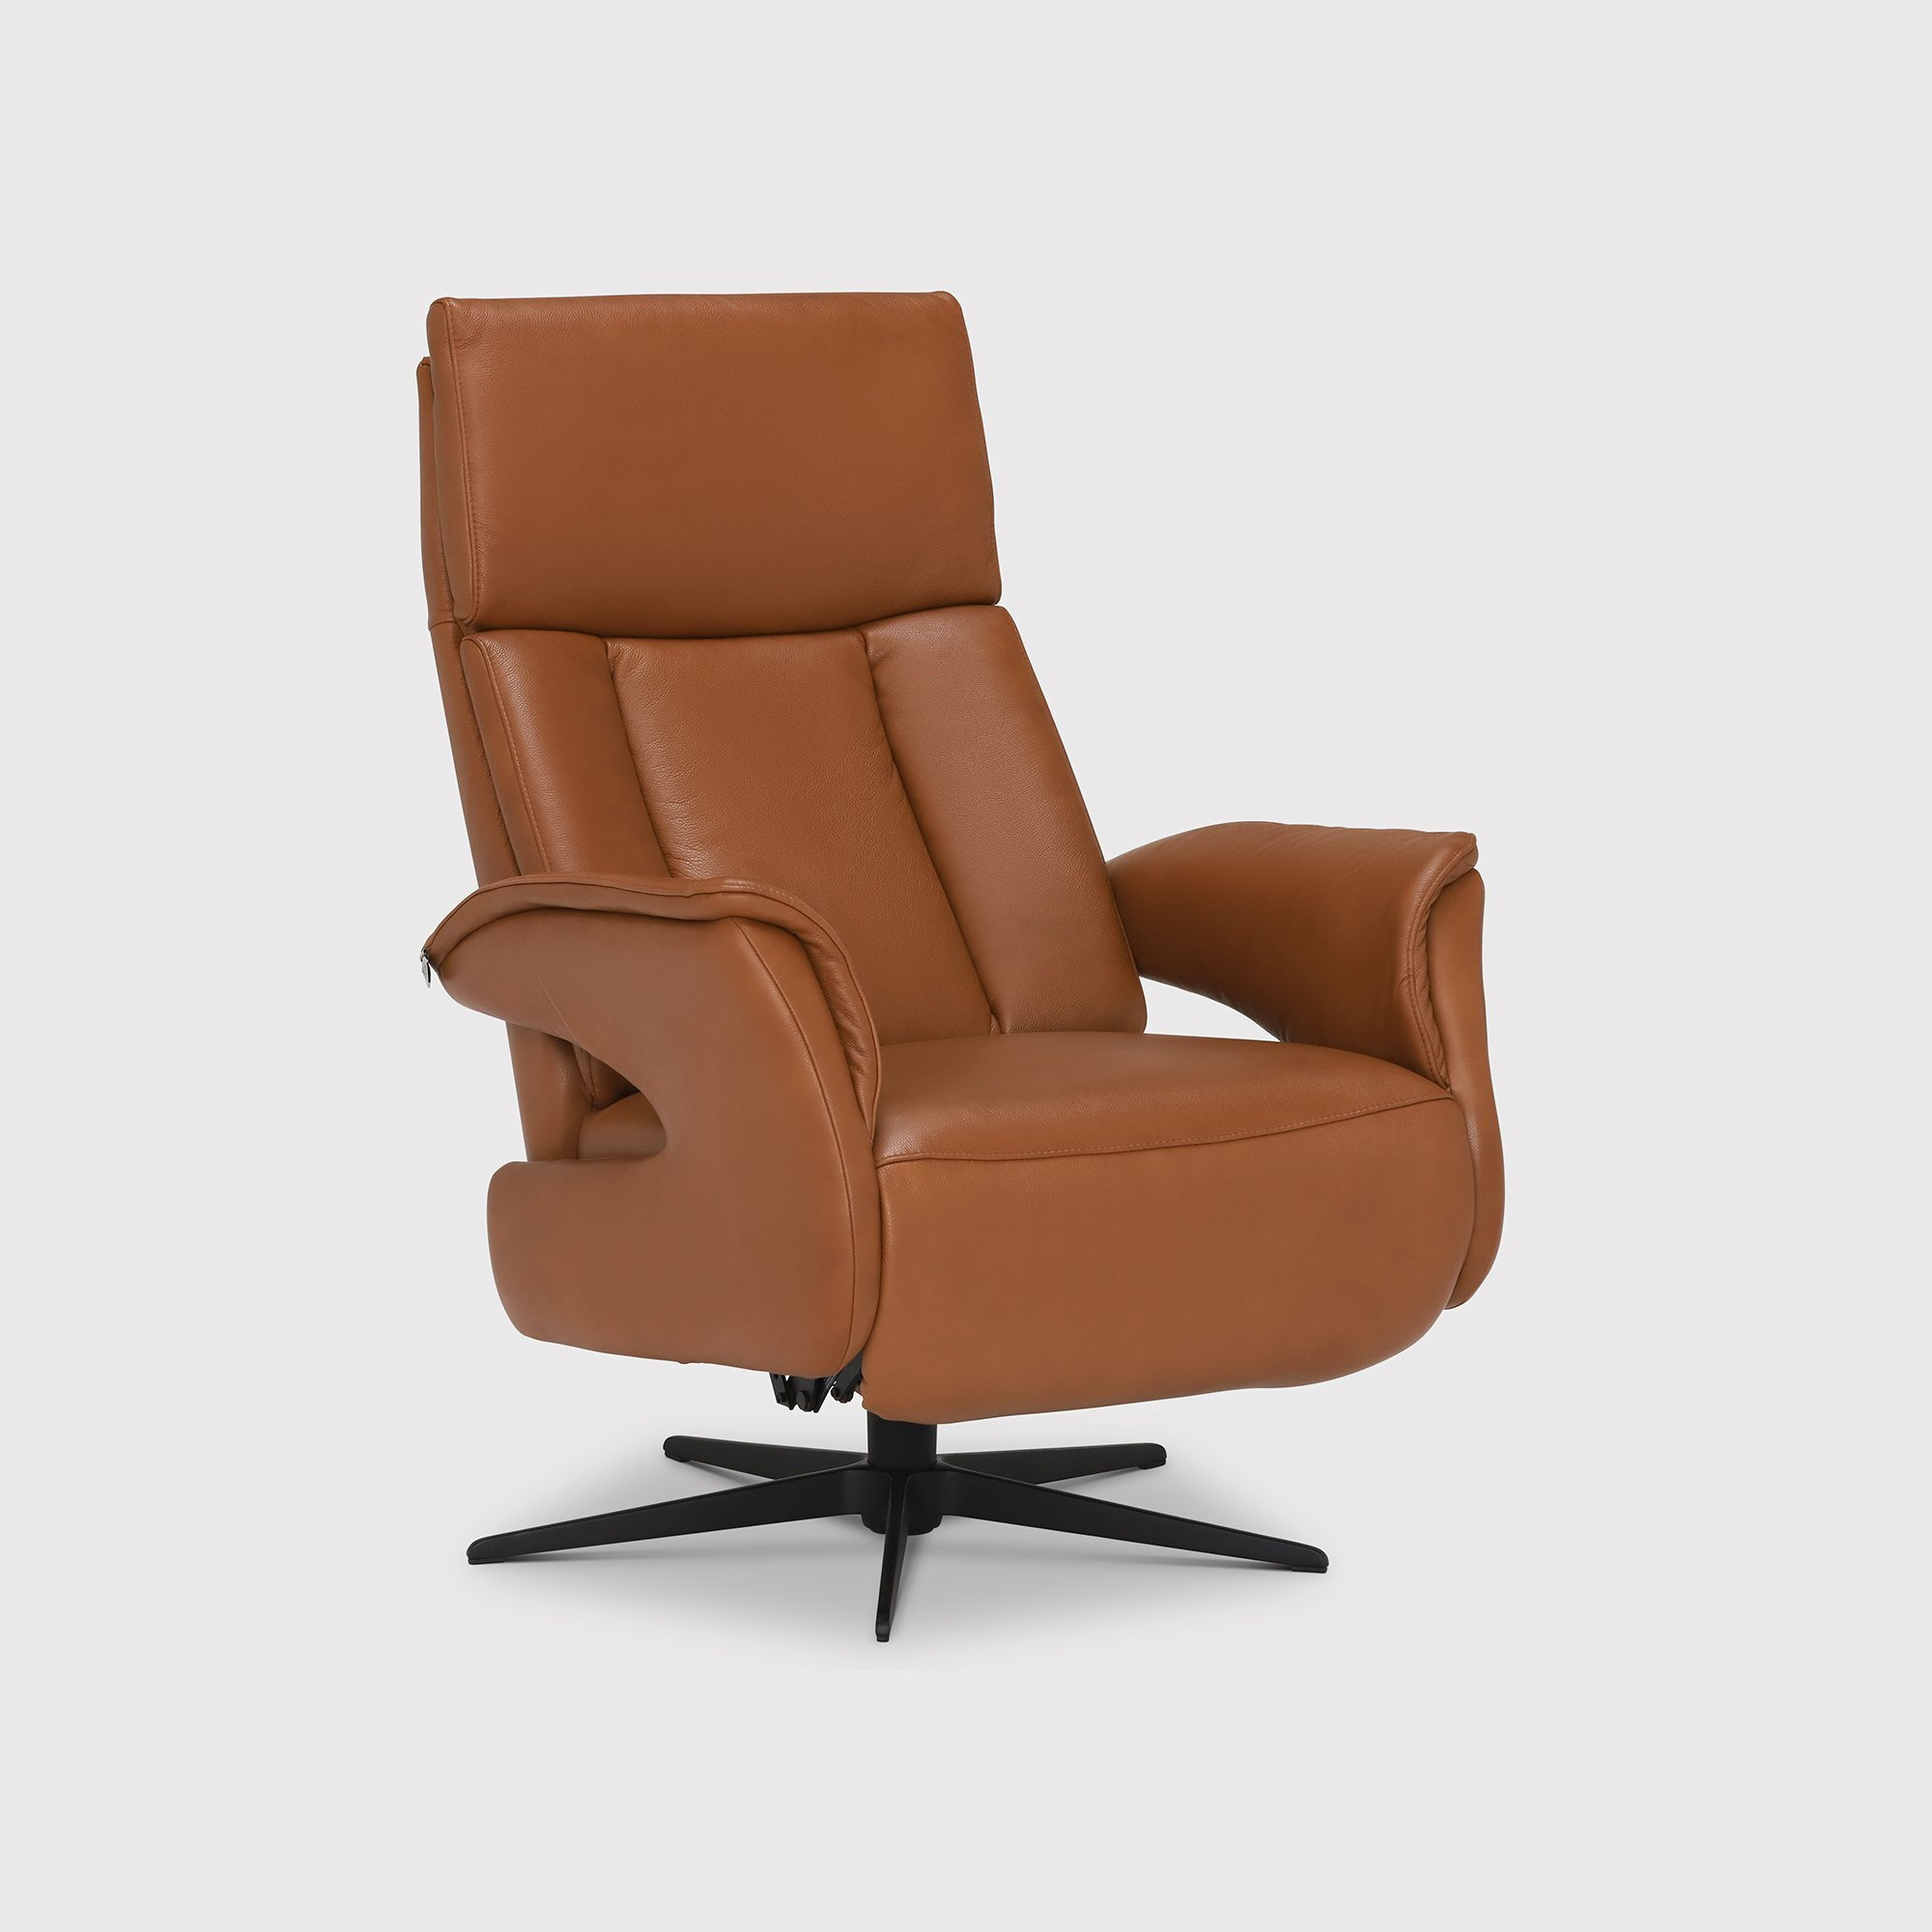 Pim Medium Manual Reclining Recliner Chair With Base D, Brown Leather - Barker & Stonehouse - image 1